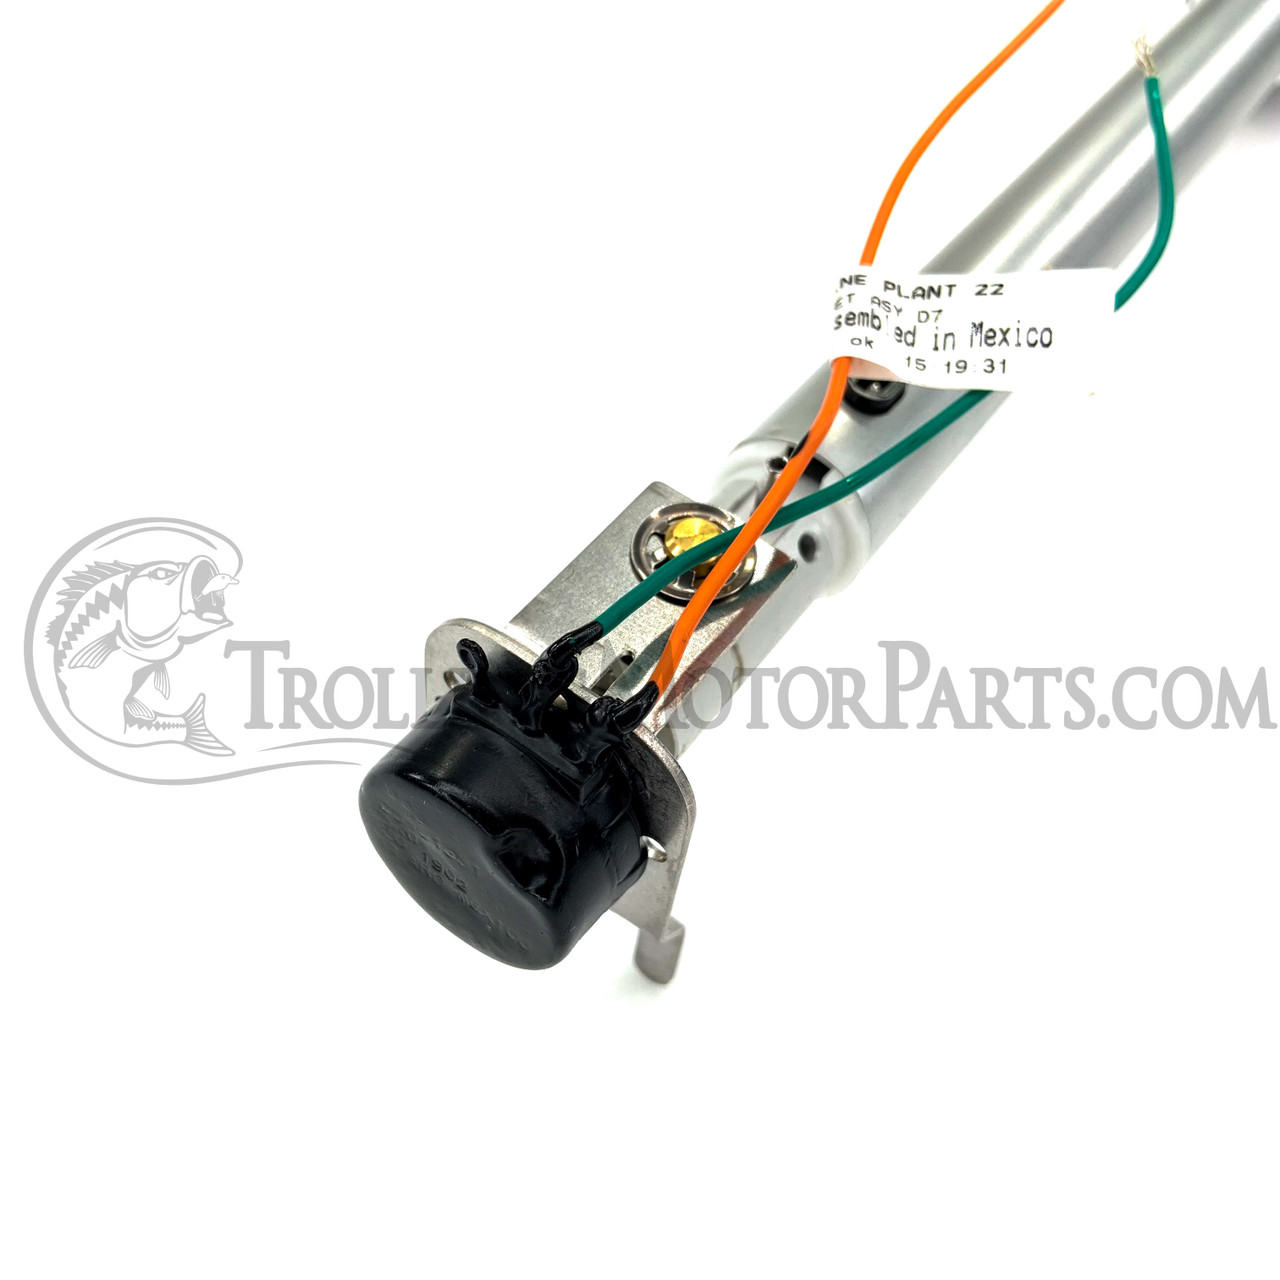 Motor Guide Digital Handle Assembly (Old Style) - Trollingmotorparts.com